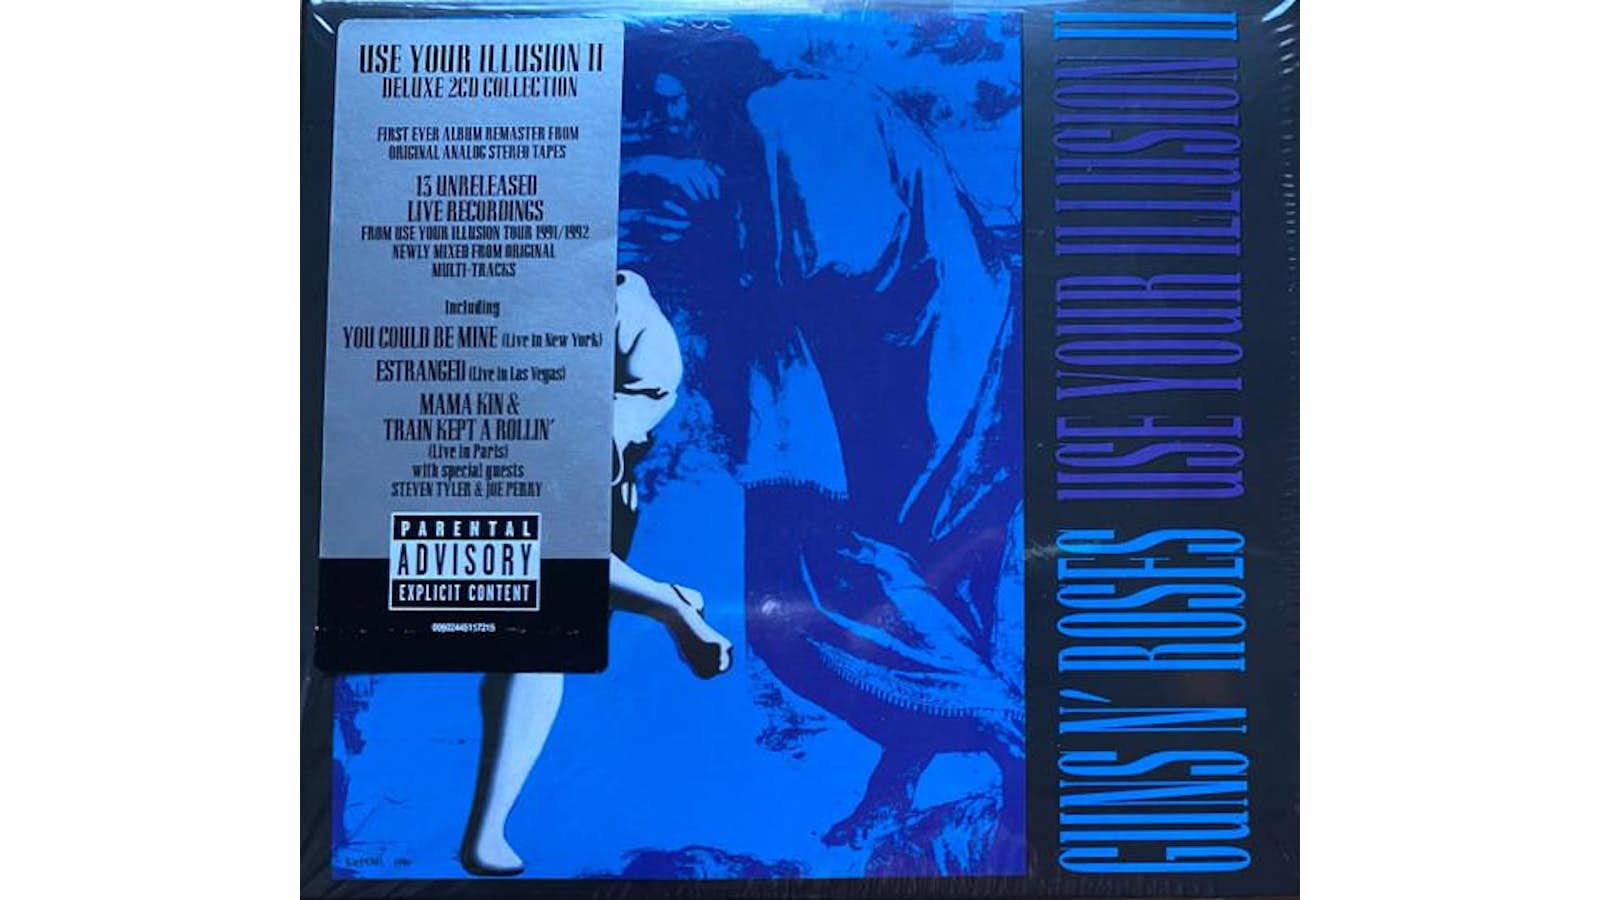 USE YOUR ILLUSION I - CD